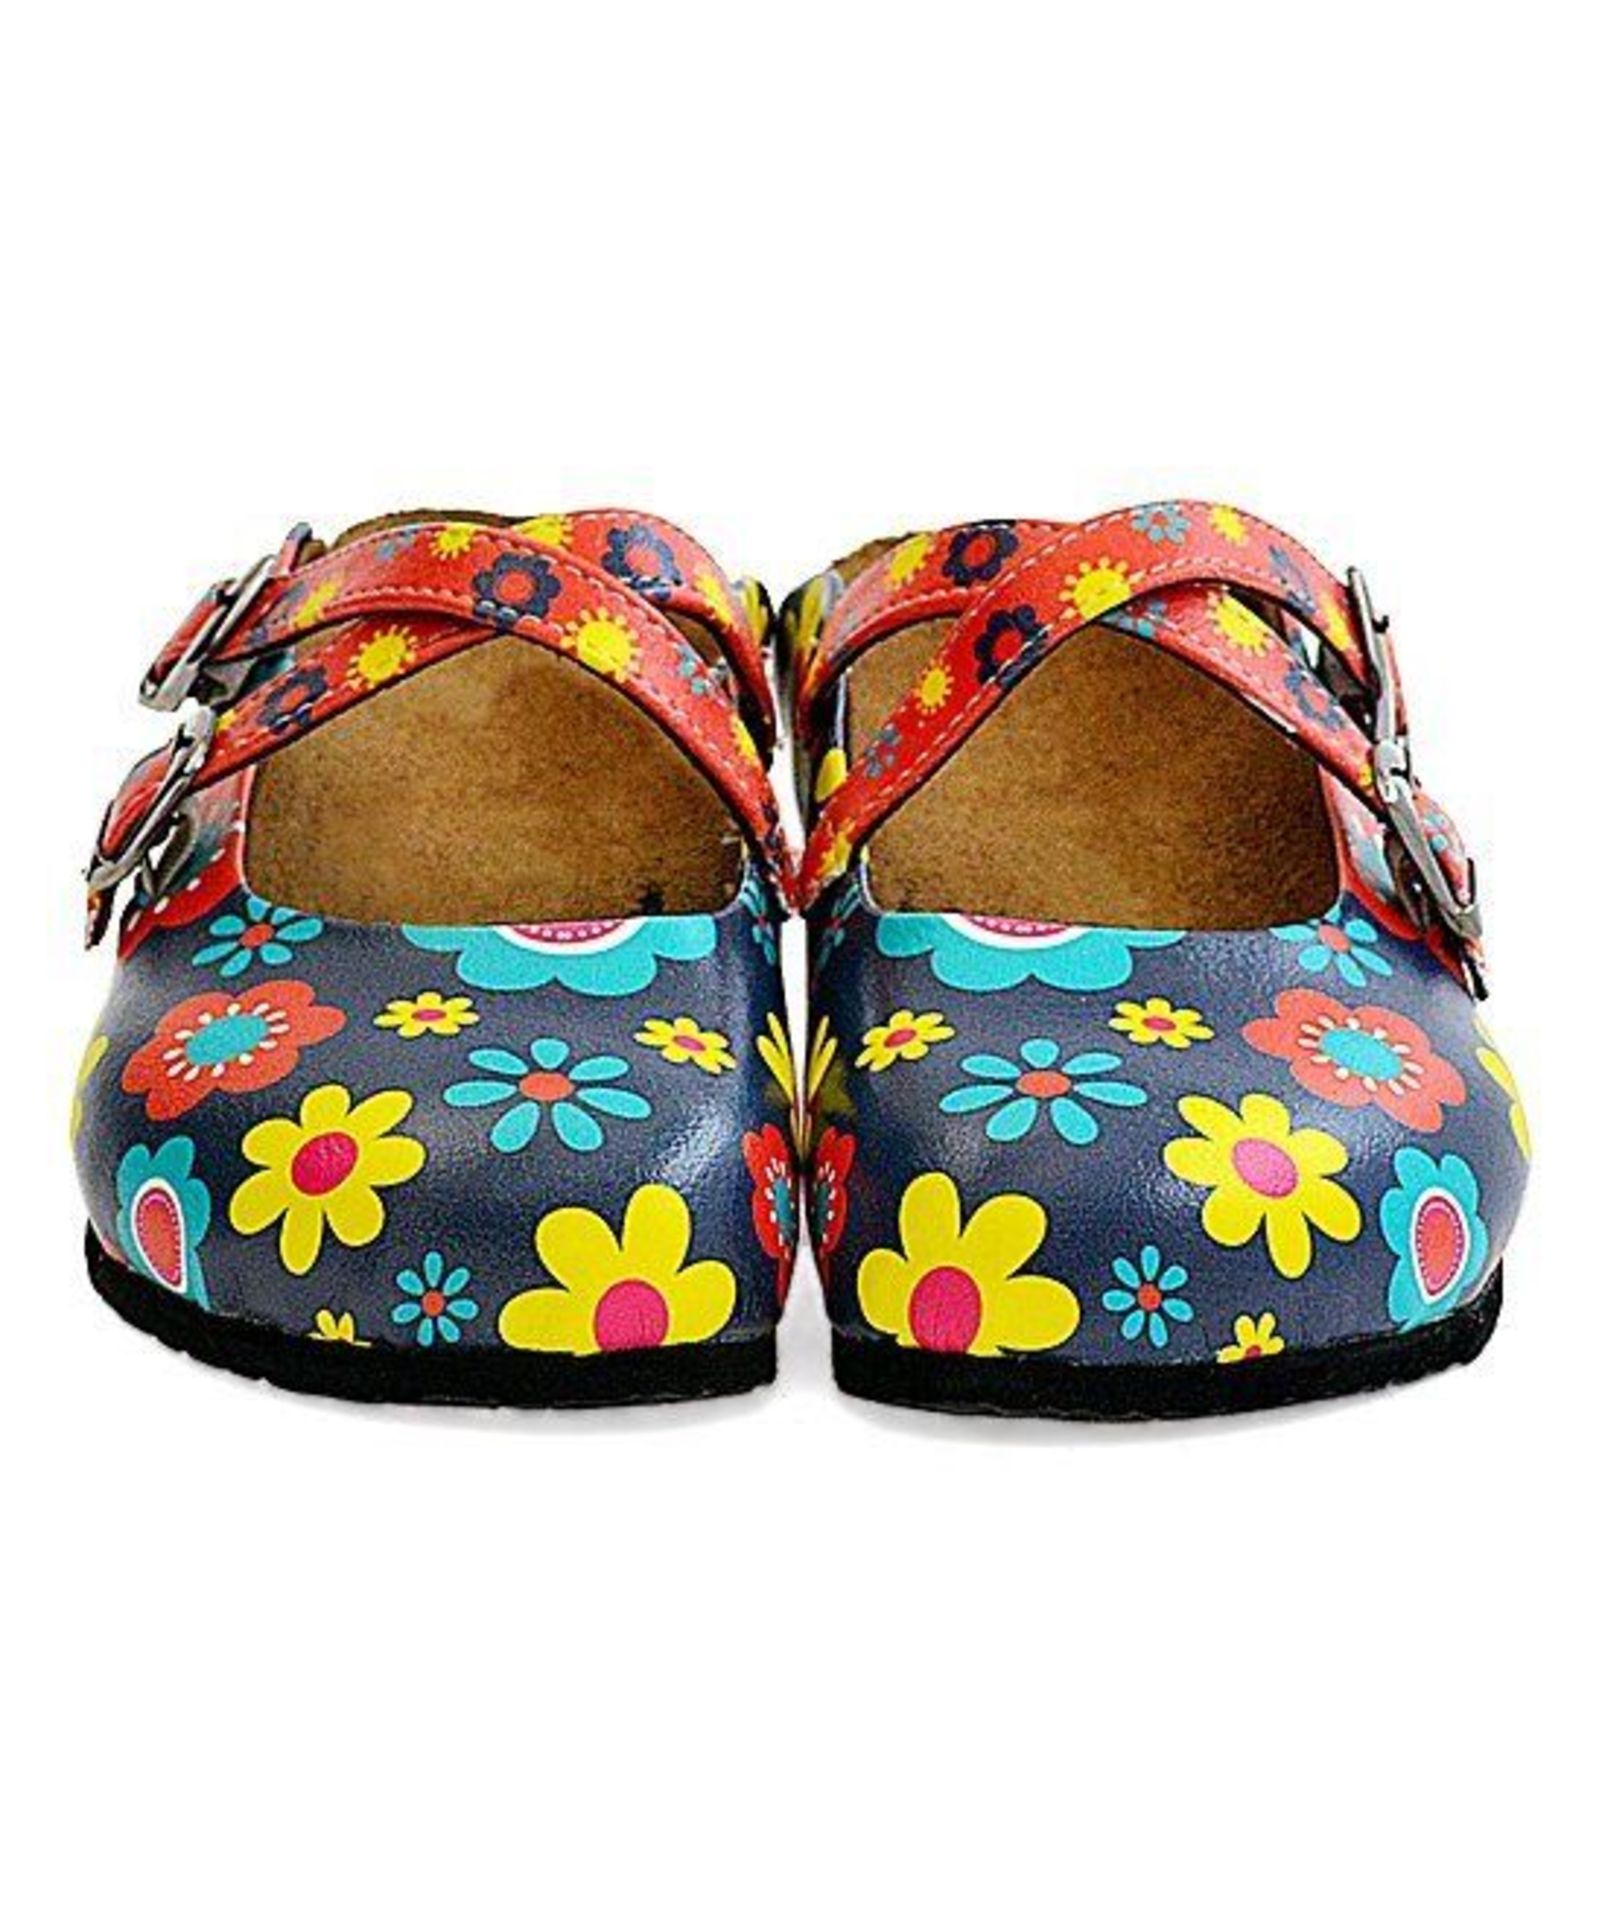 Calceo Blue Floral Cross-Strap Mule (Uk Size:8/Euro Size:41) (New With Box) [Ref: 47526285-B-003]